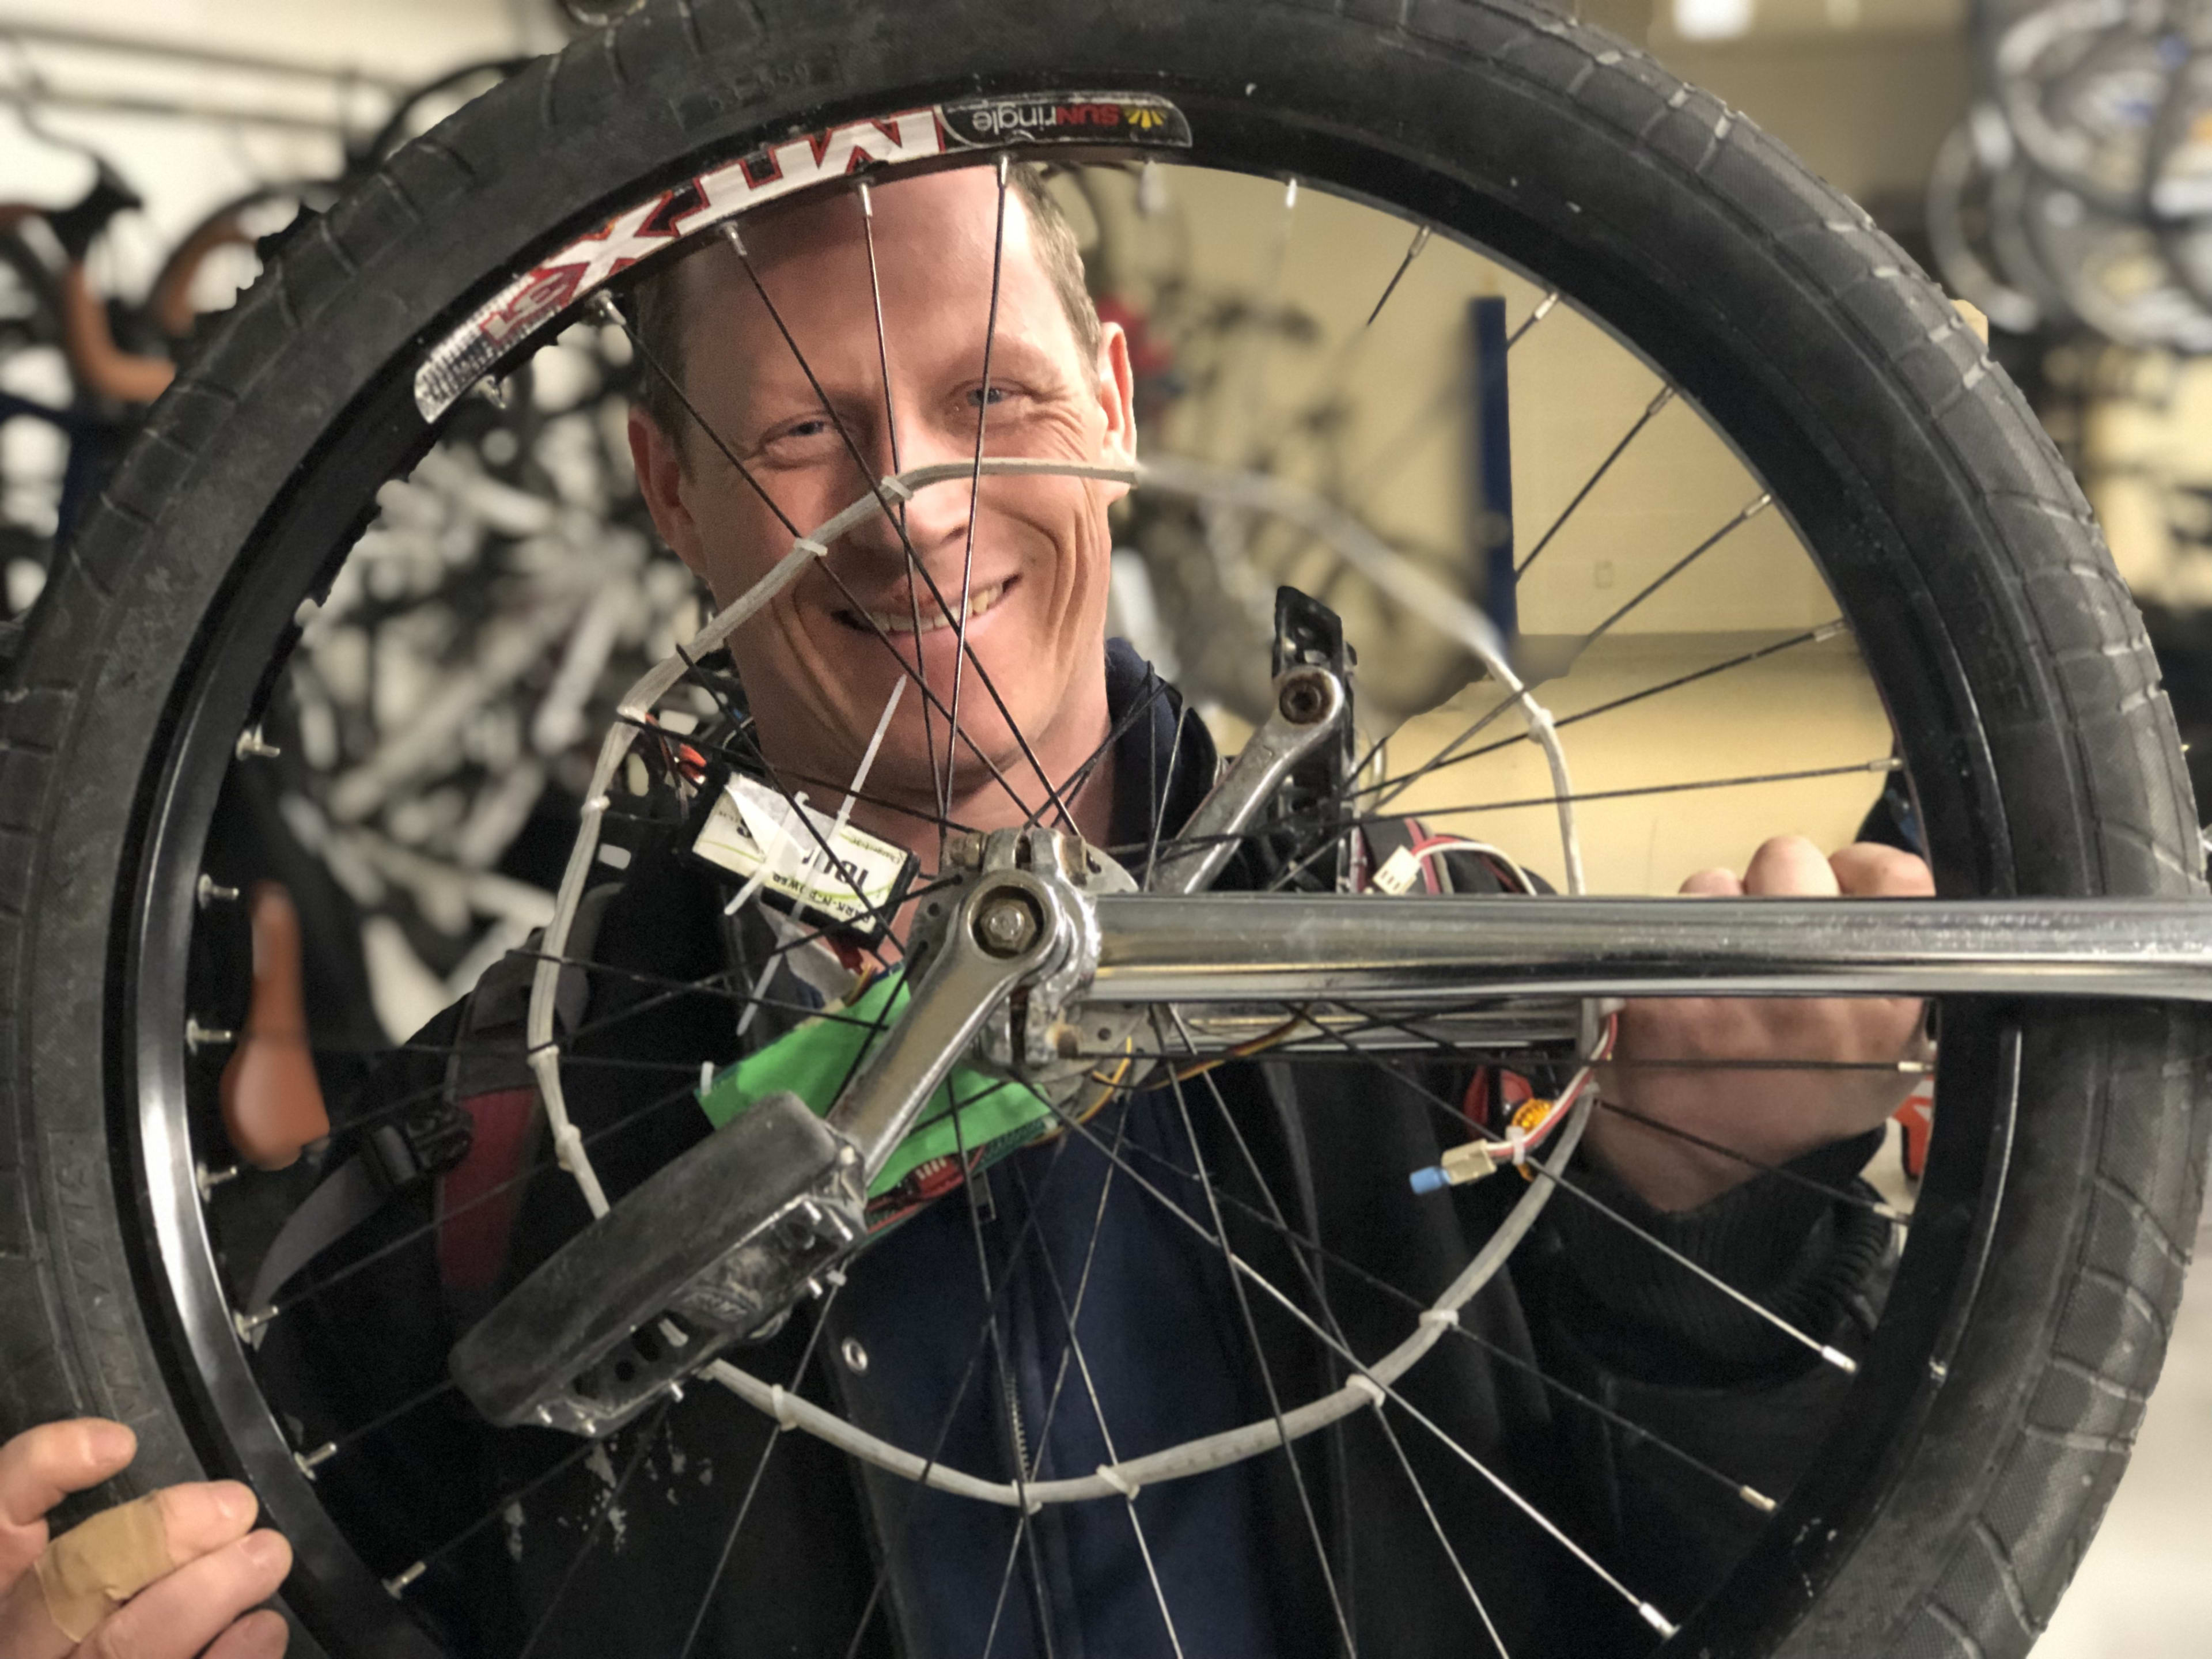 Ryan McArthur is shown looking through the spokes of his unicycle, as he stands inside the bike l...